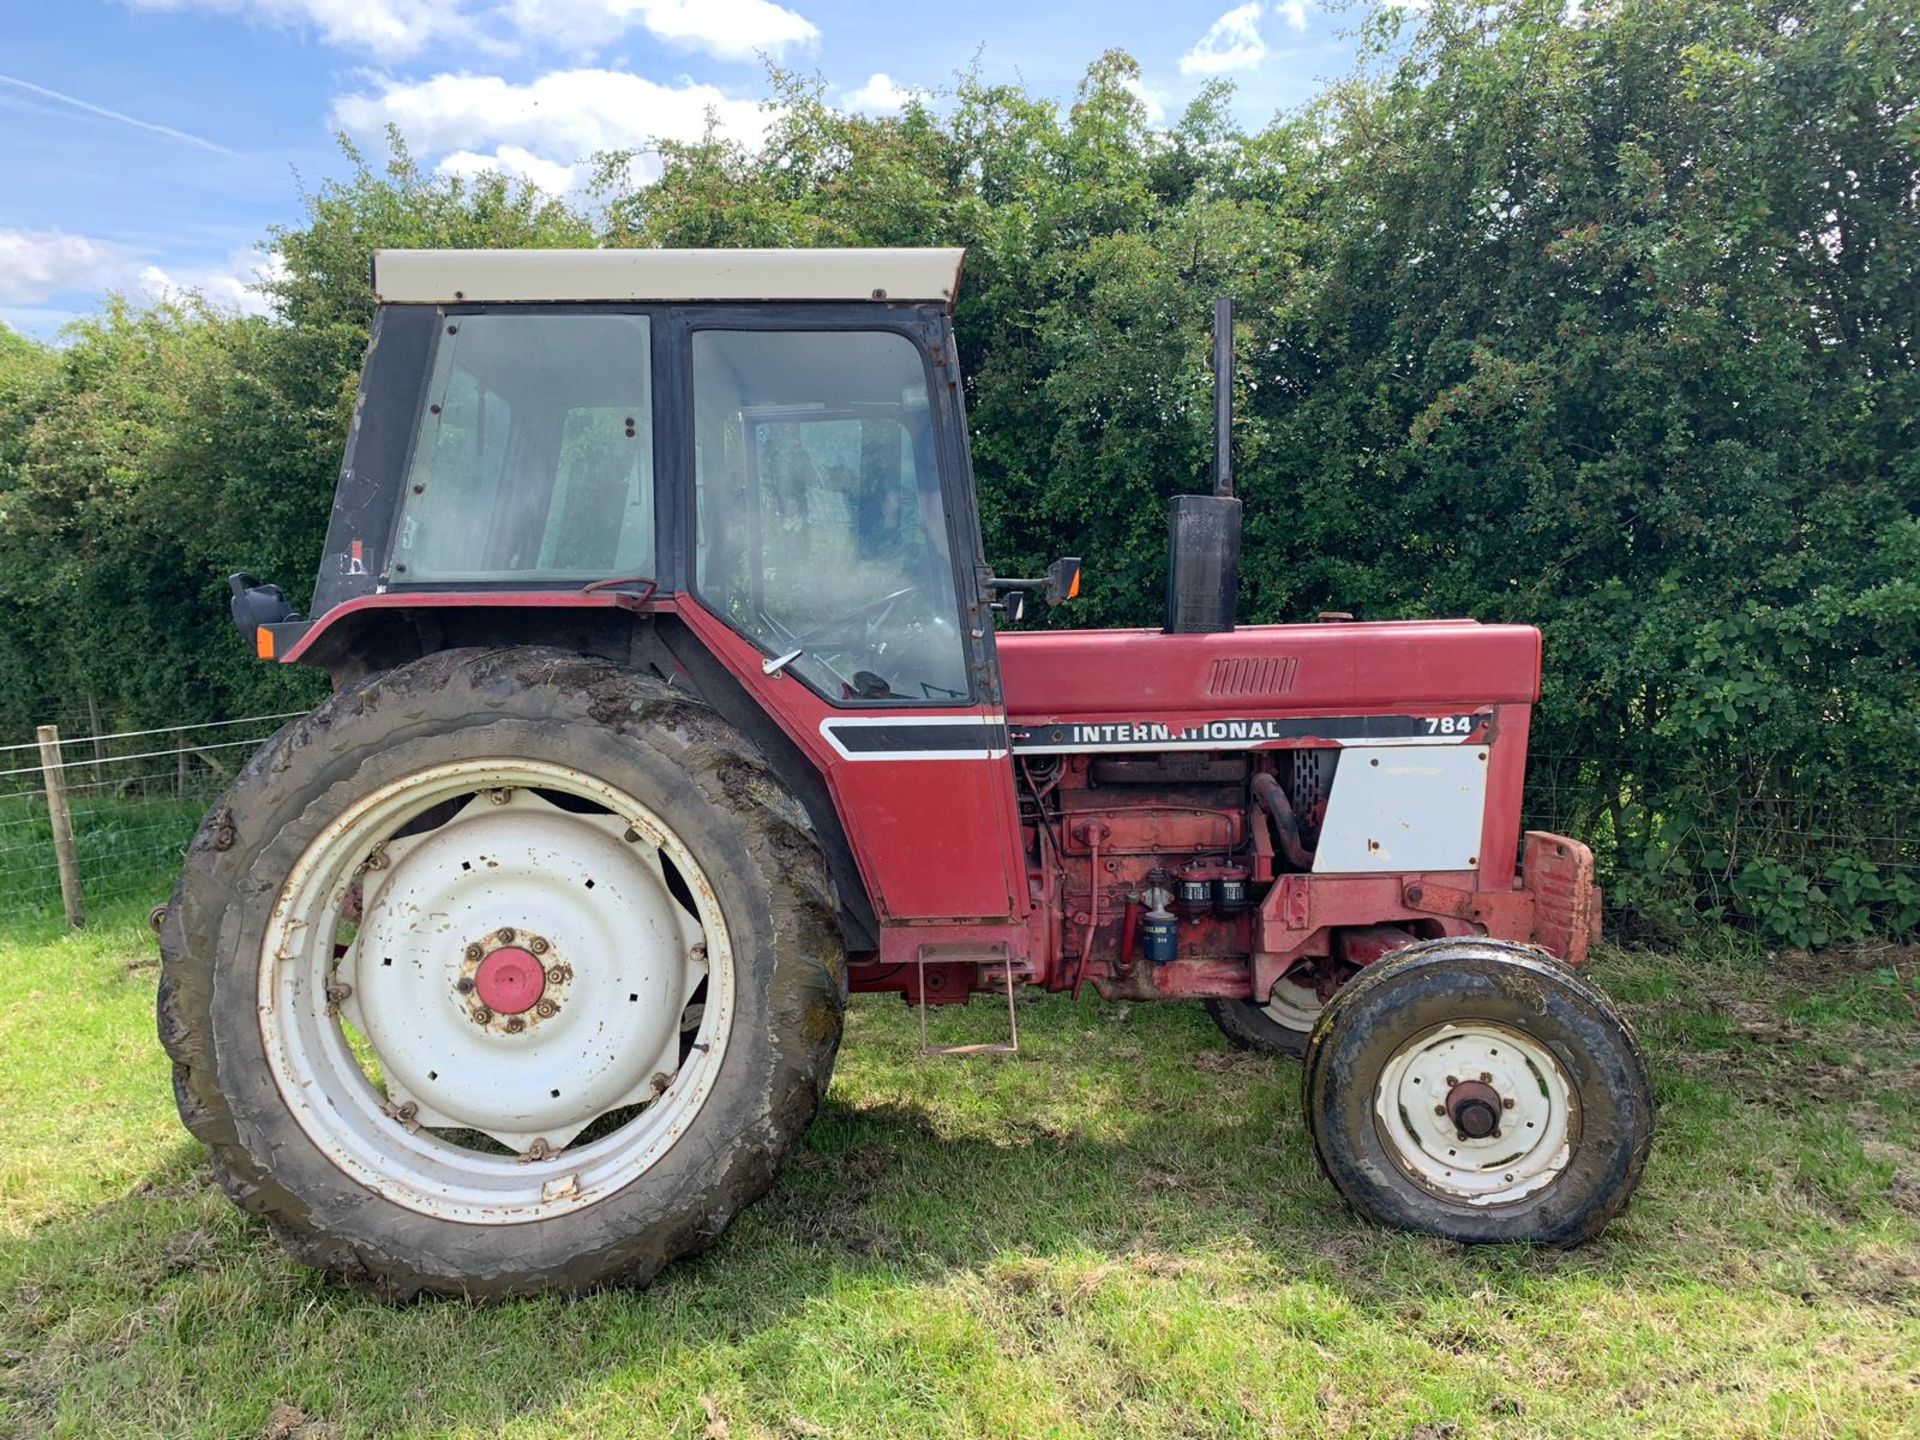 RED INTERNATIONAL HARVESTER 784 DIESEL TRACTOR WITH FULL GLASS CAB, RUNS AND WORKS *PLUS VAT*